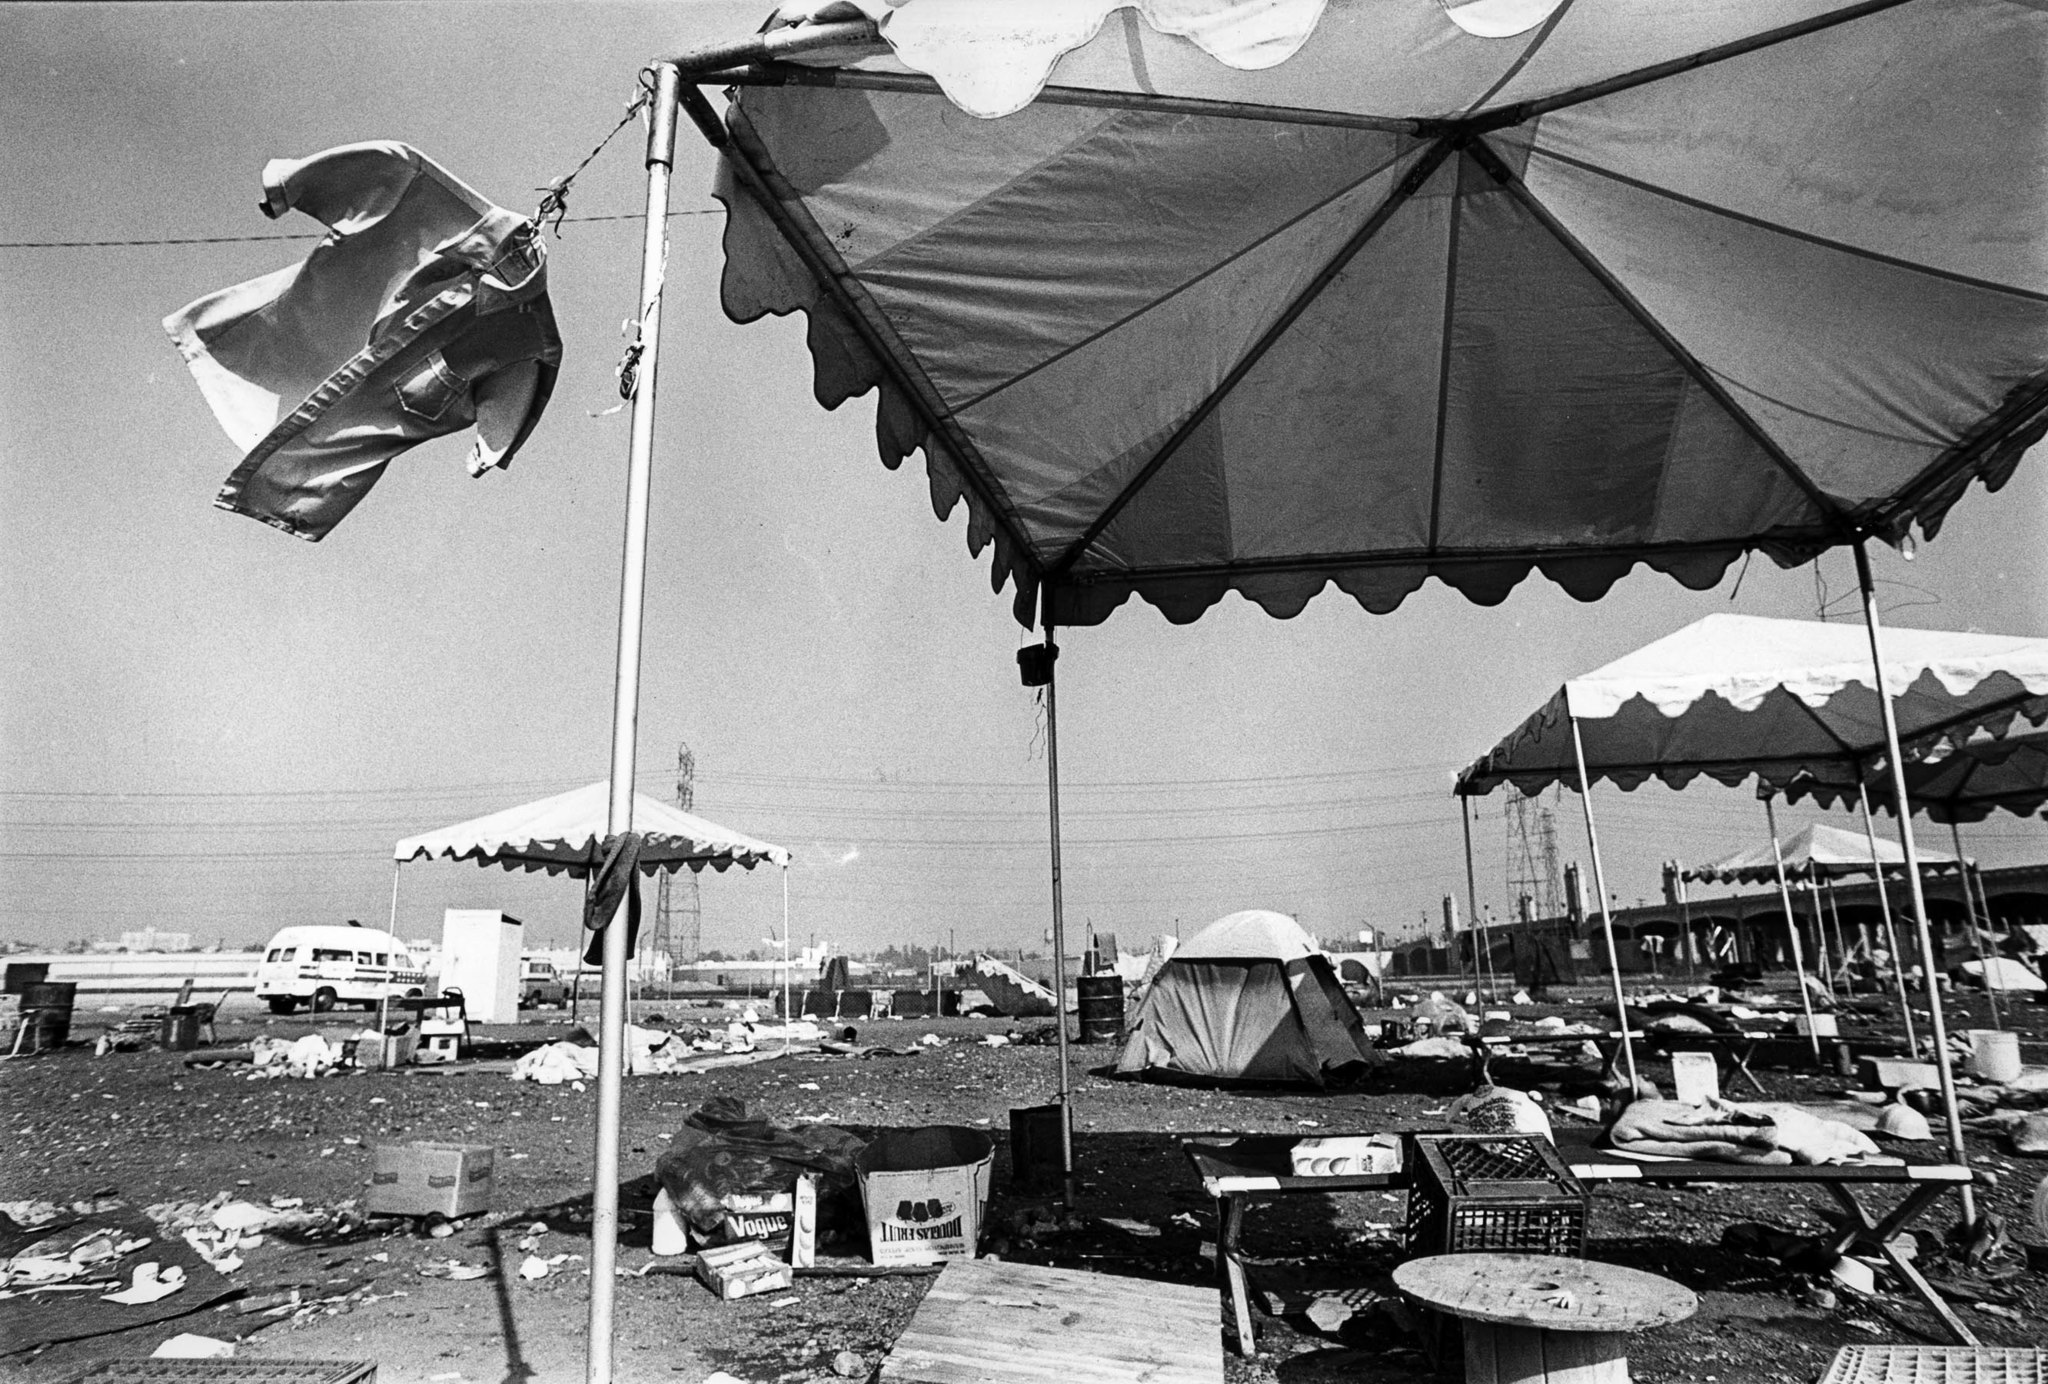 Sep. 23, 1987: Shirt flaps in the breeze after Urban Campground is closed. This photo appeared in th